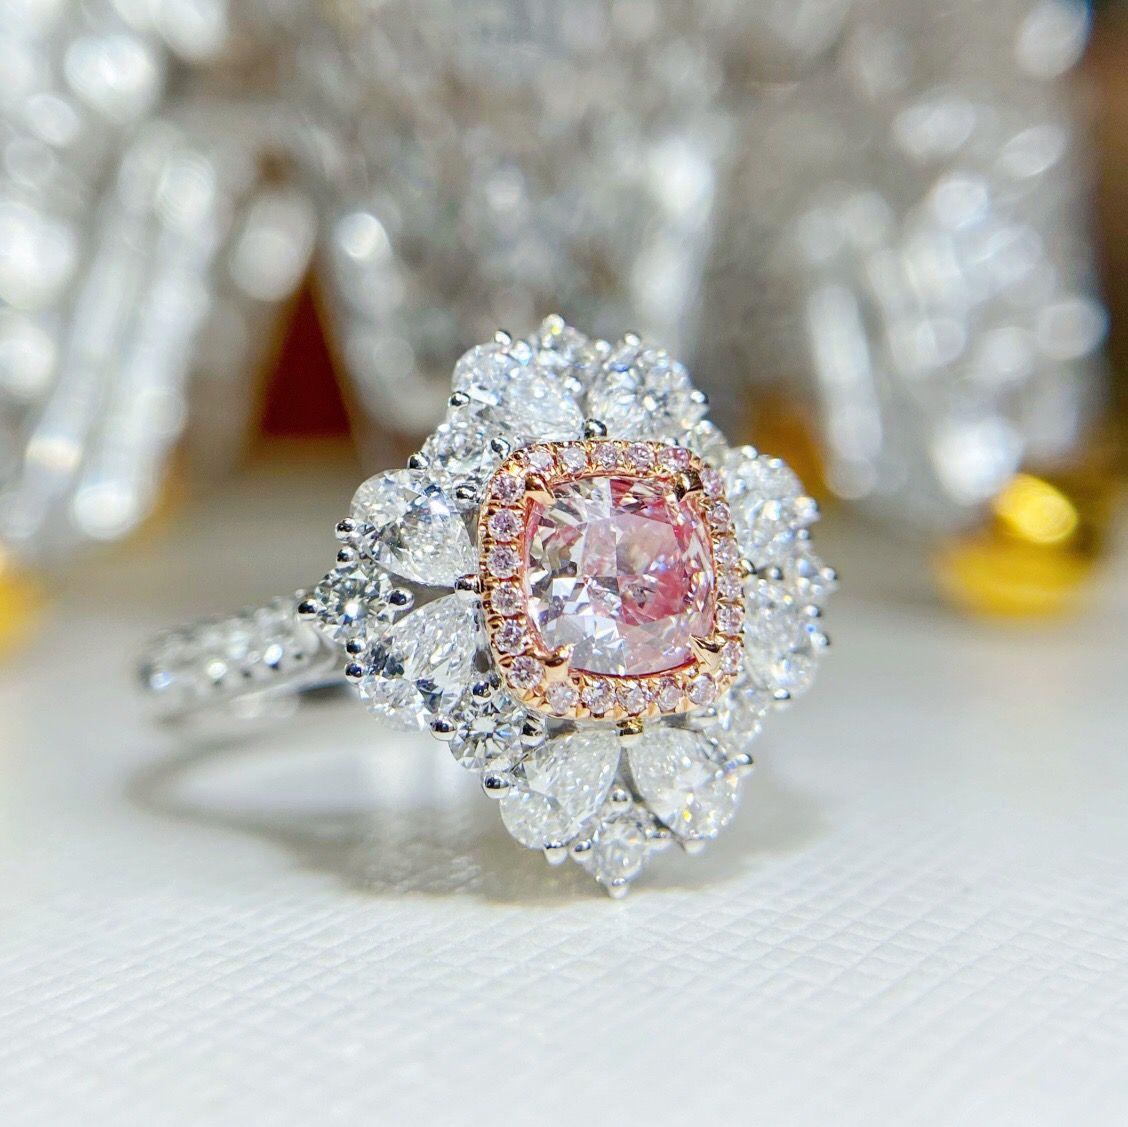 Cushion Cut 0.61 Carat Very Light Pink Diamond Ring & Pendant Convertible I1 Clarity  For Sale